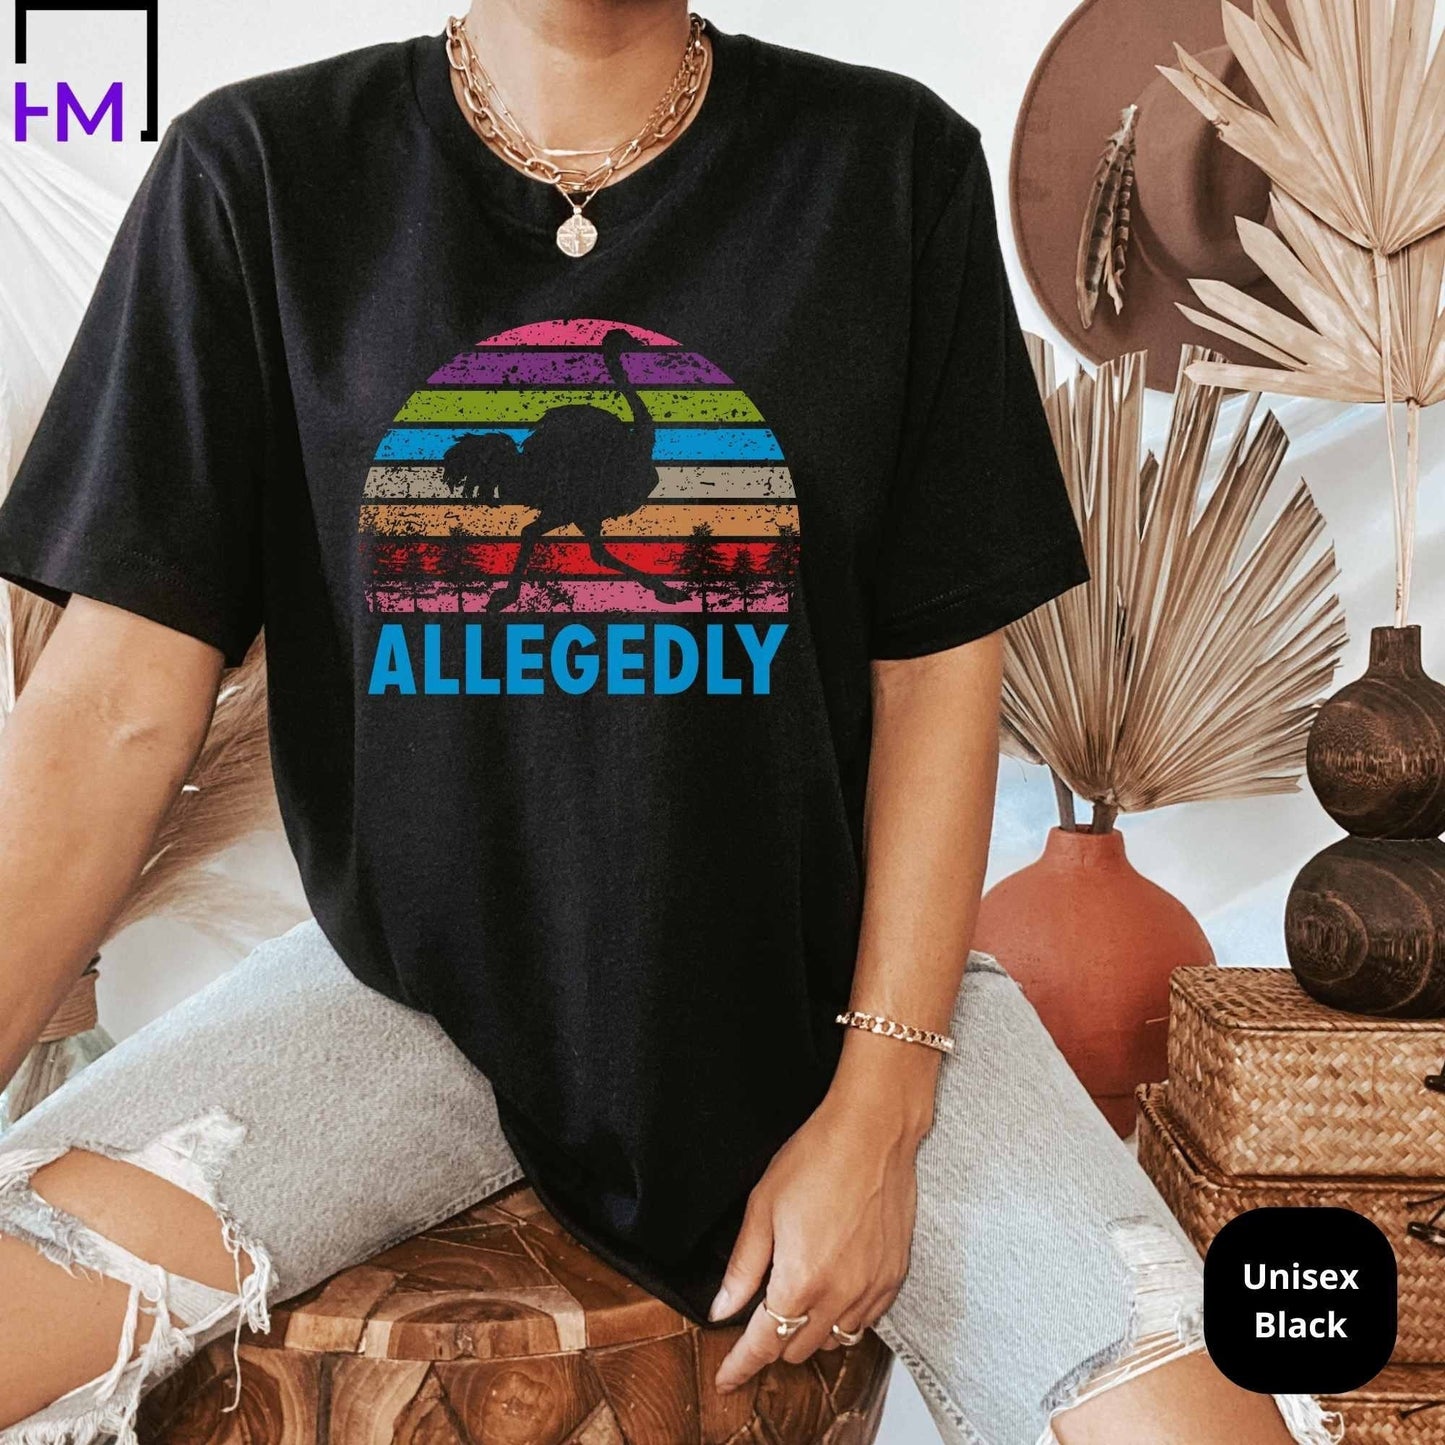 Allegedly Shirt, Allegedly Ostrich, Allegedly Black T-Shirt, Valentines Day Shirt, Gift for Valentines, Gift For Husband, Fathers Day Gift T